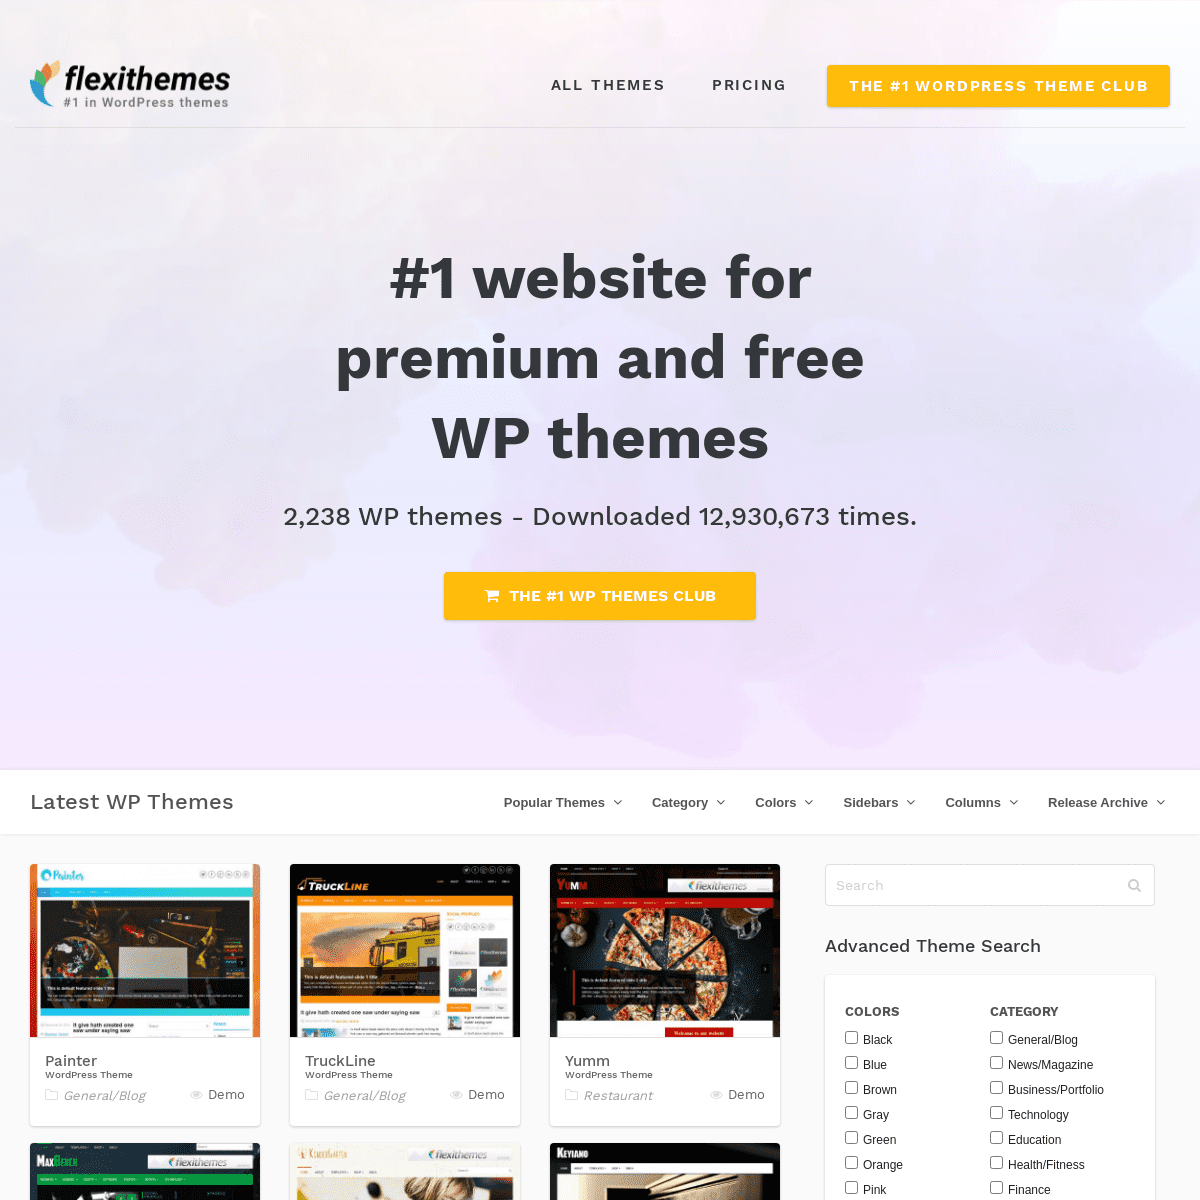 A complete backup of https://flexithemes.com